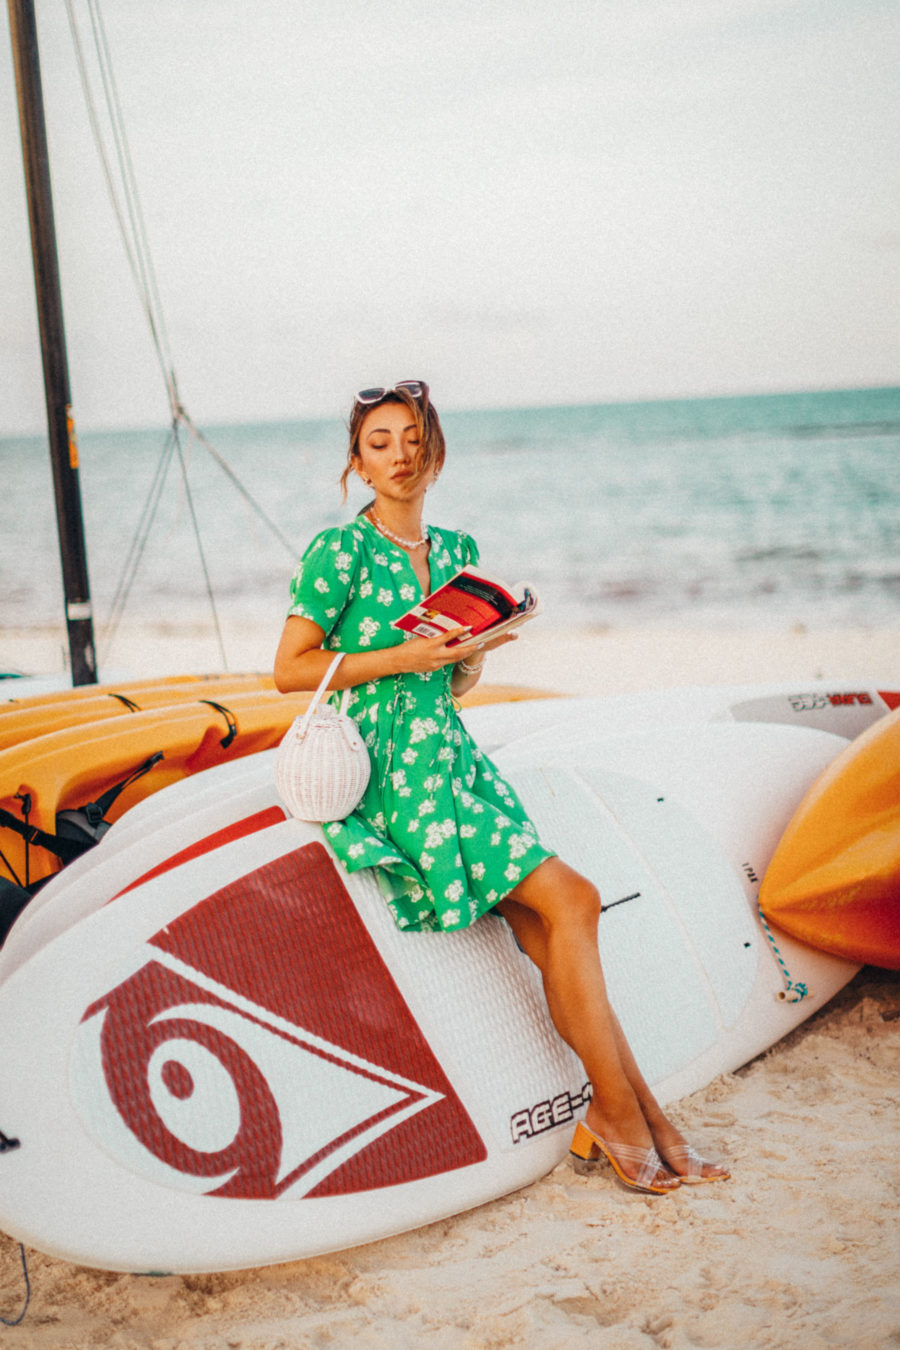 fashion blogger jessica wang wears green dress in mexico while sharing her spring reading list // Jessica Wang - Notjessfashion.com